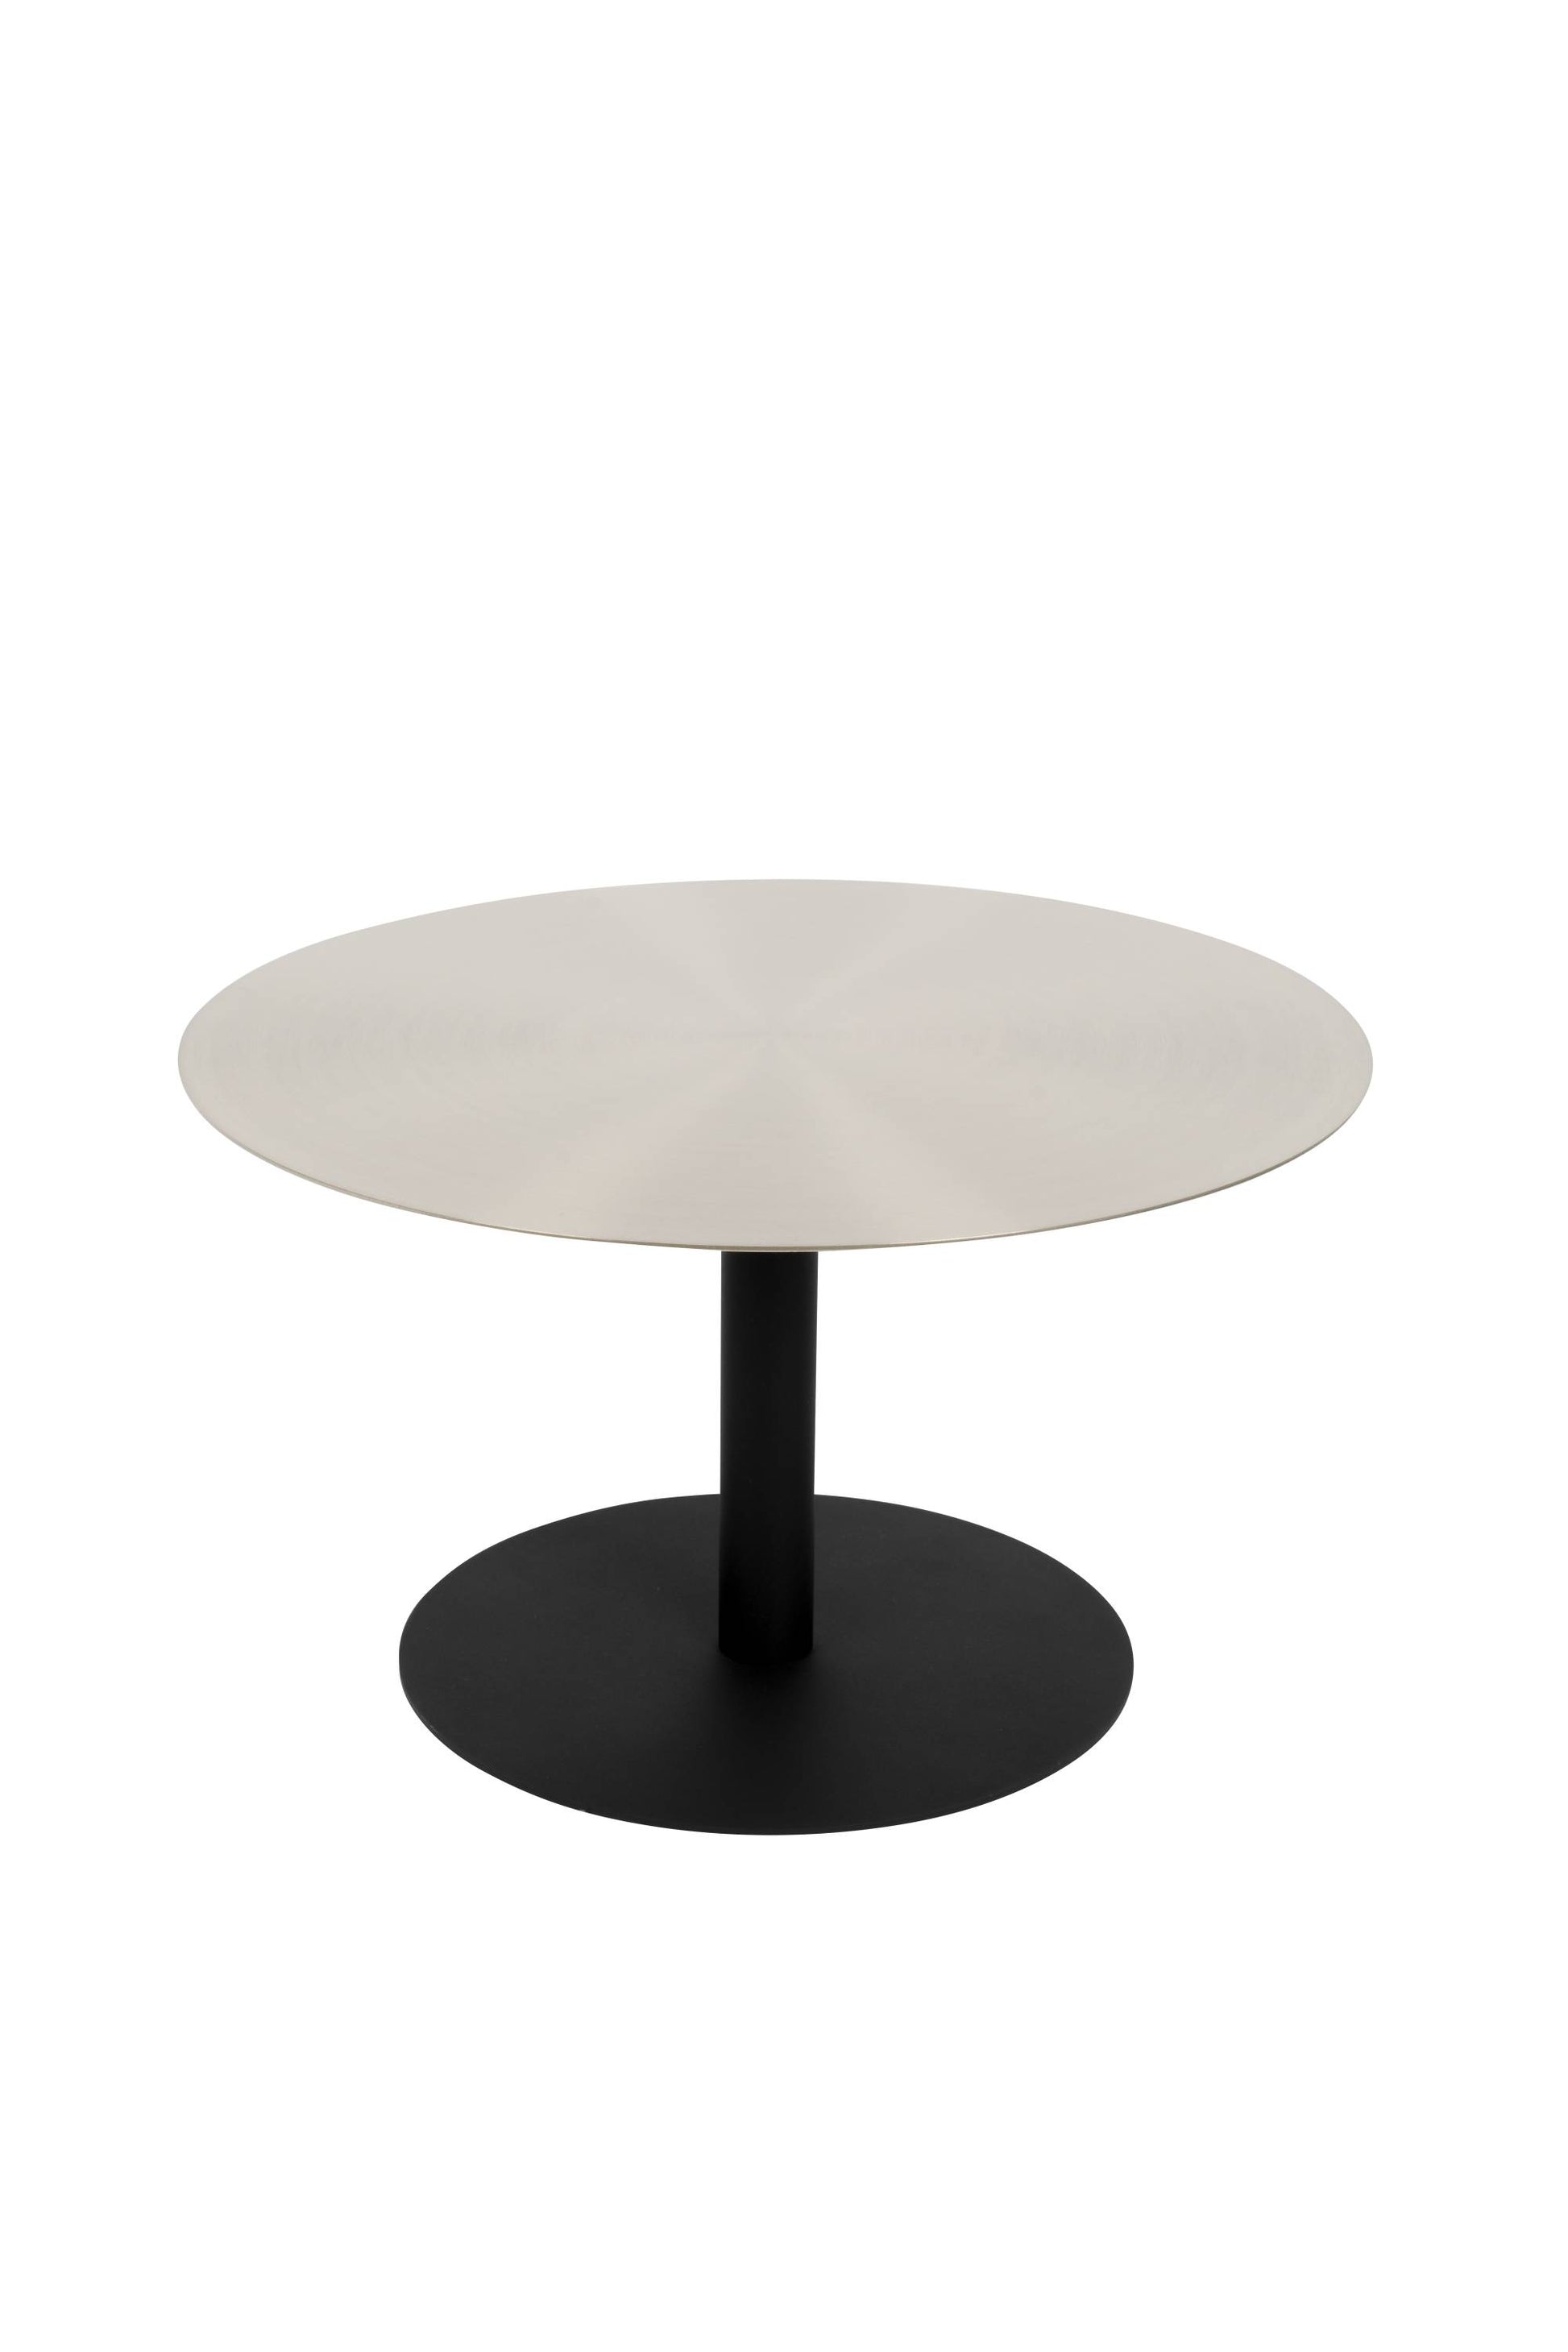 Zuiver | COFFEE TABLE SNOW BRUSHED SATIN Default Title